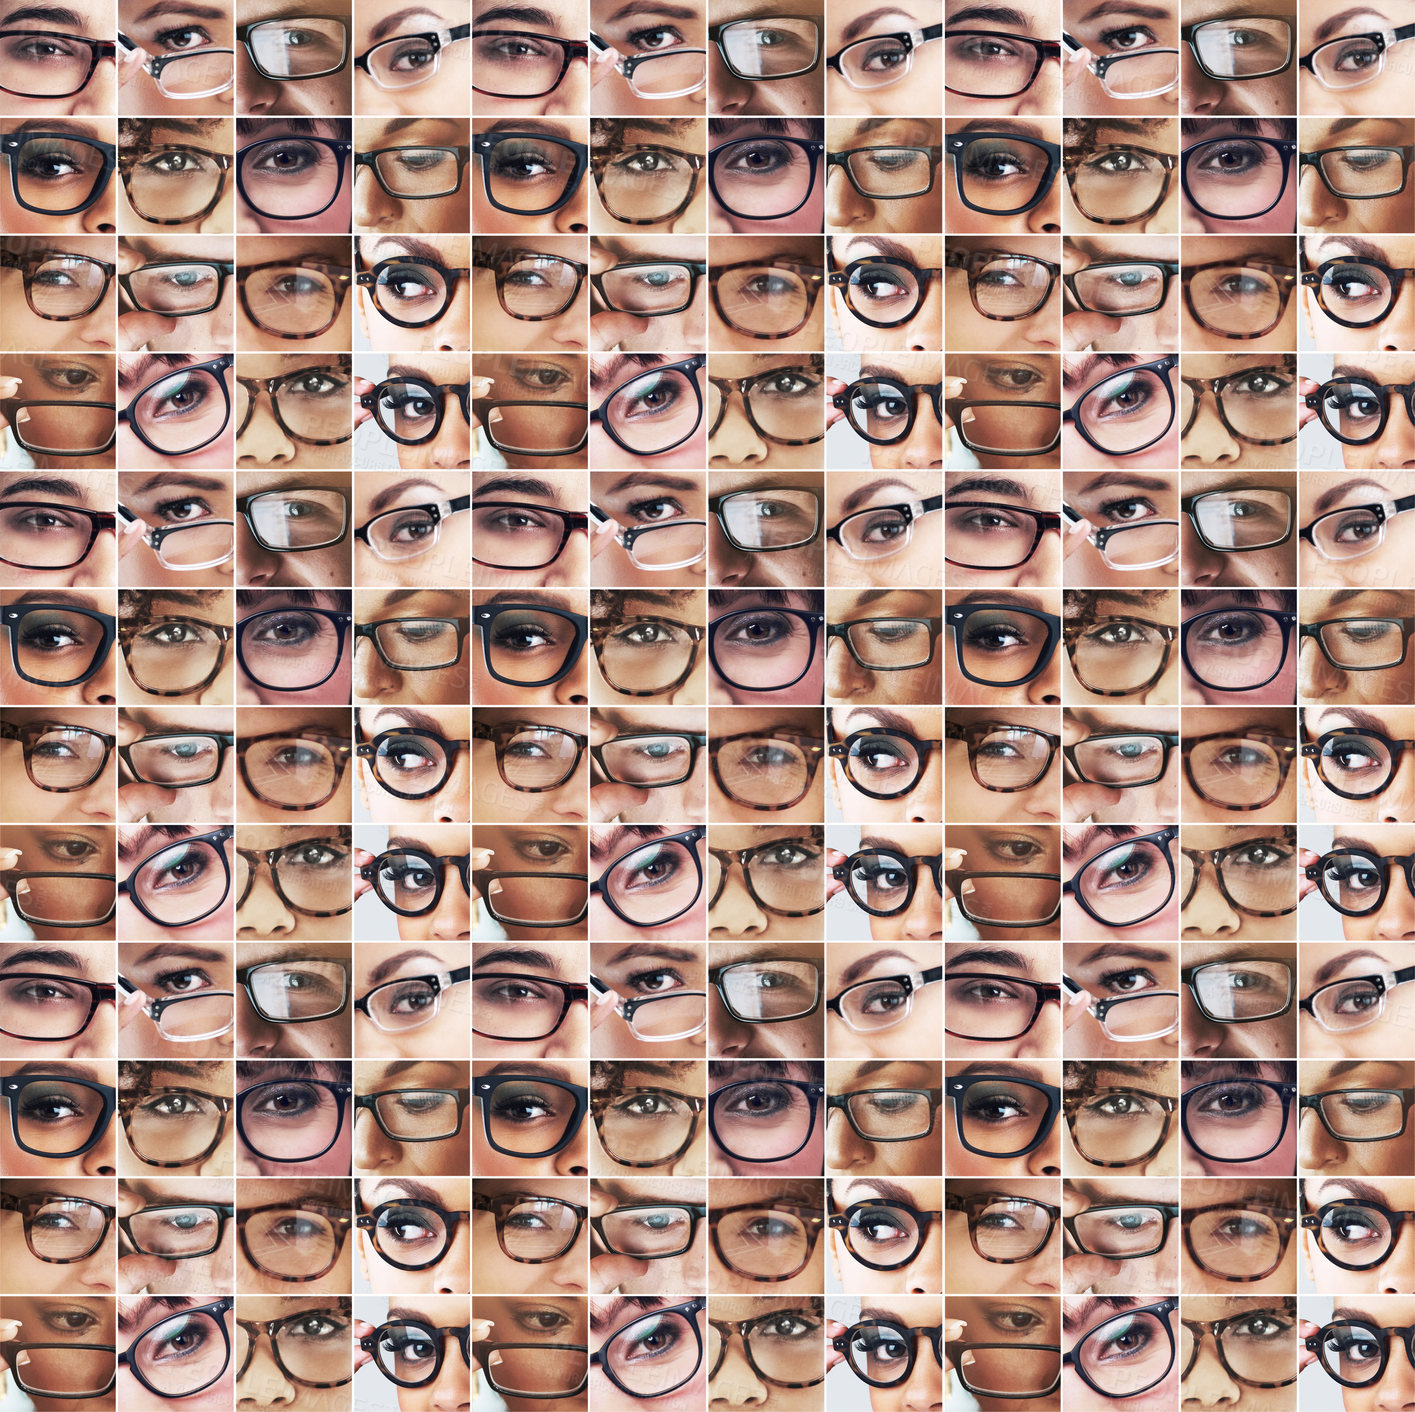 Buy stock photo Composite image of an assortment of eyes wearing glasses